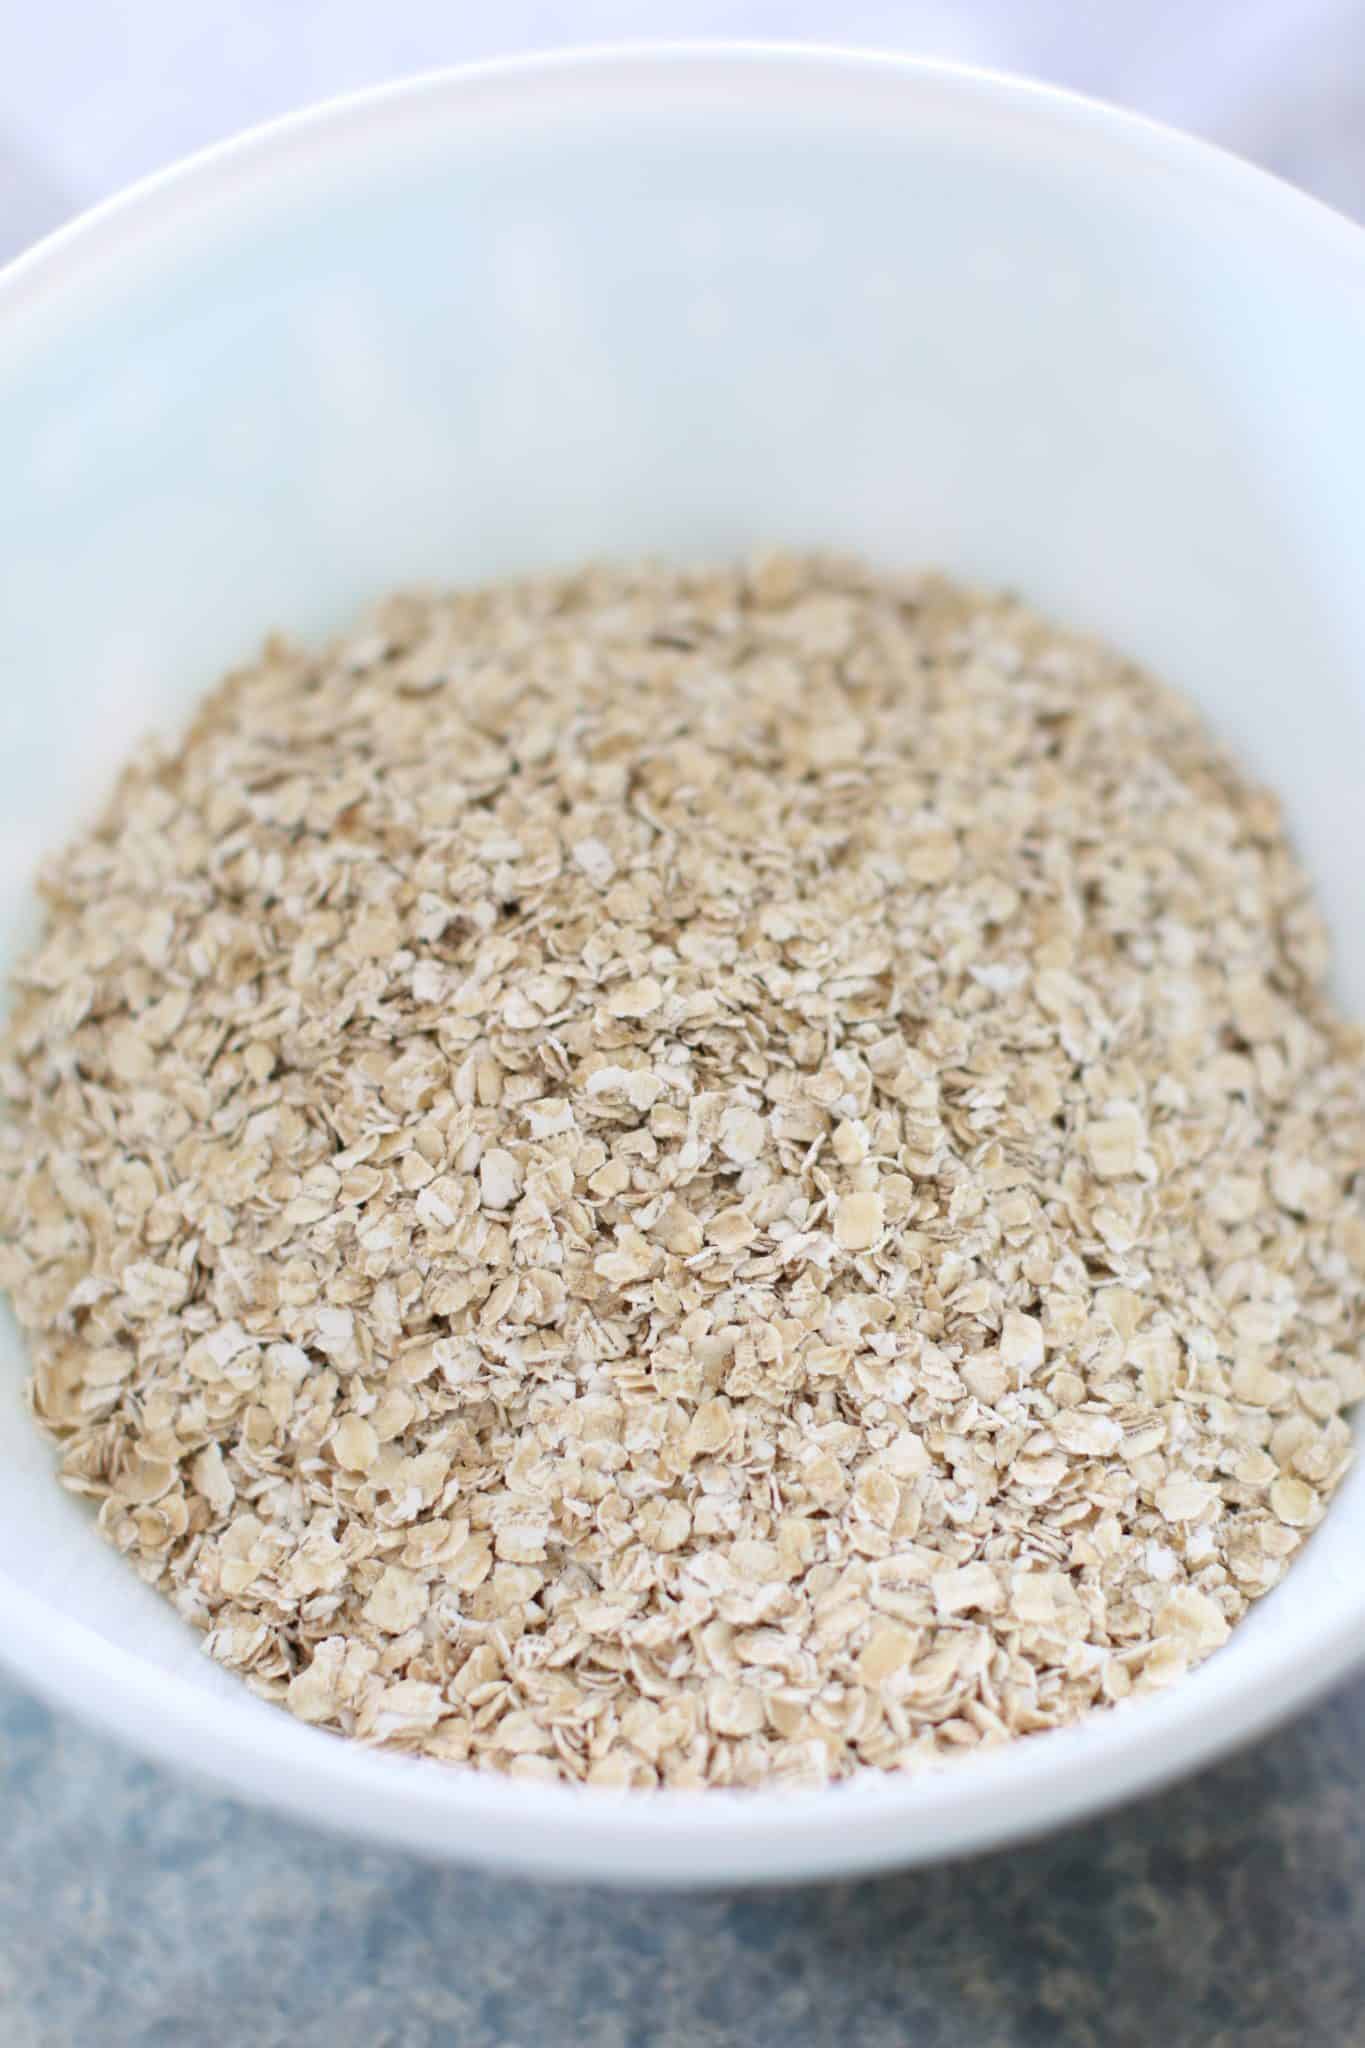 quick cooking oats shown in a white bowl